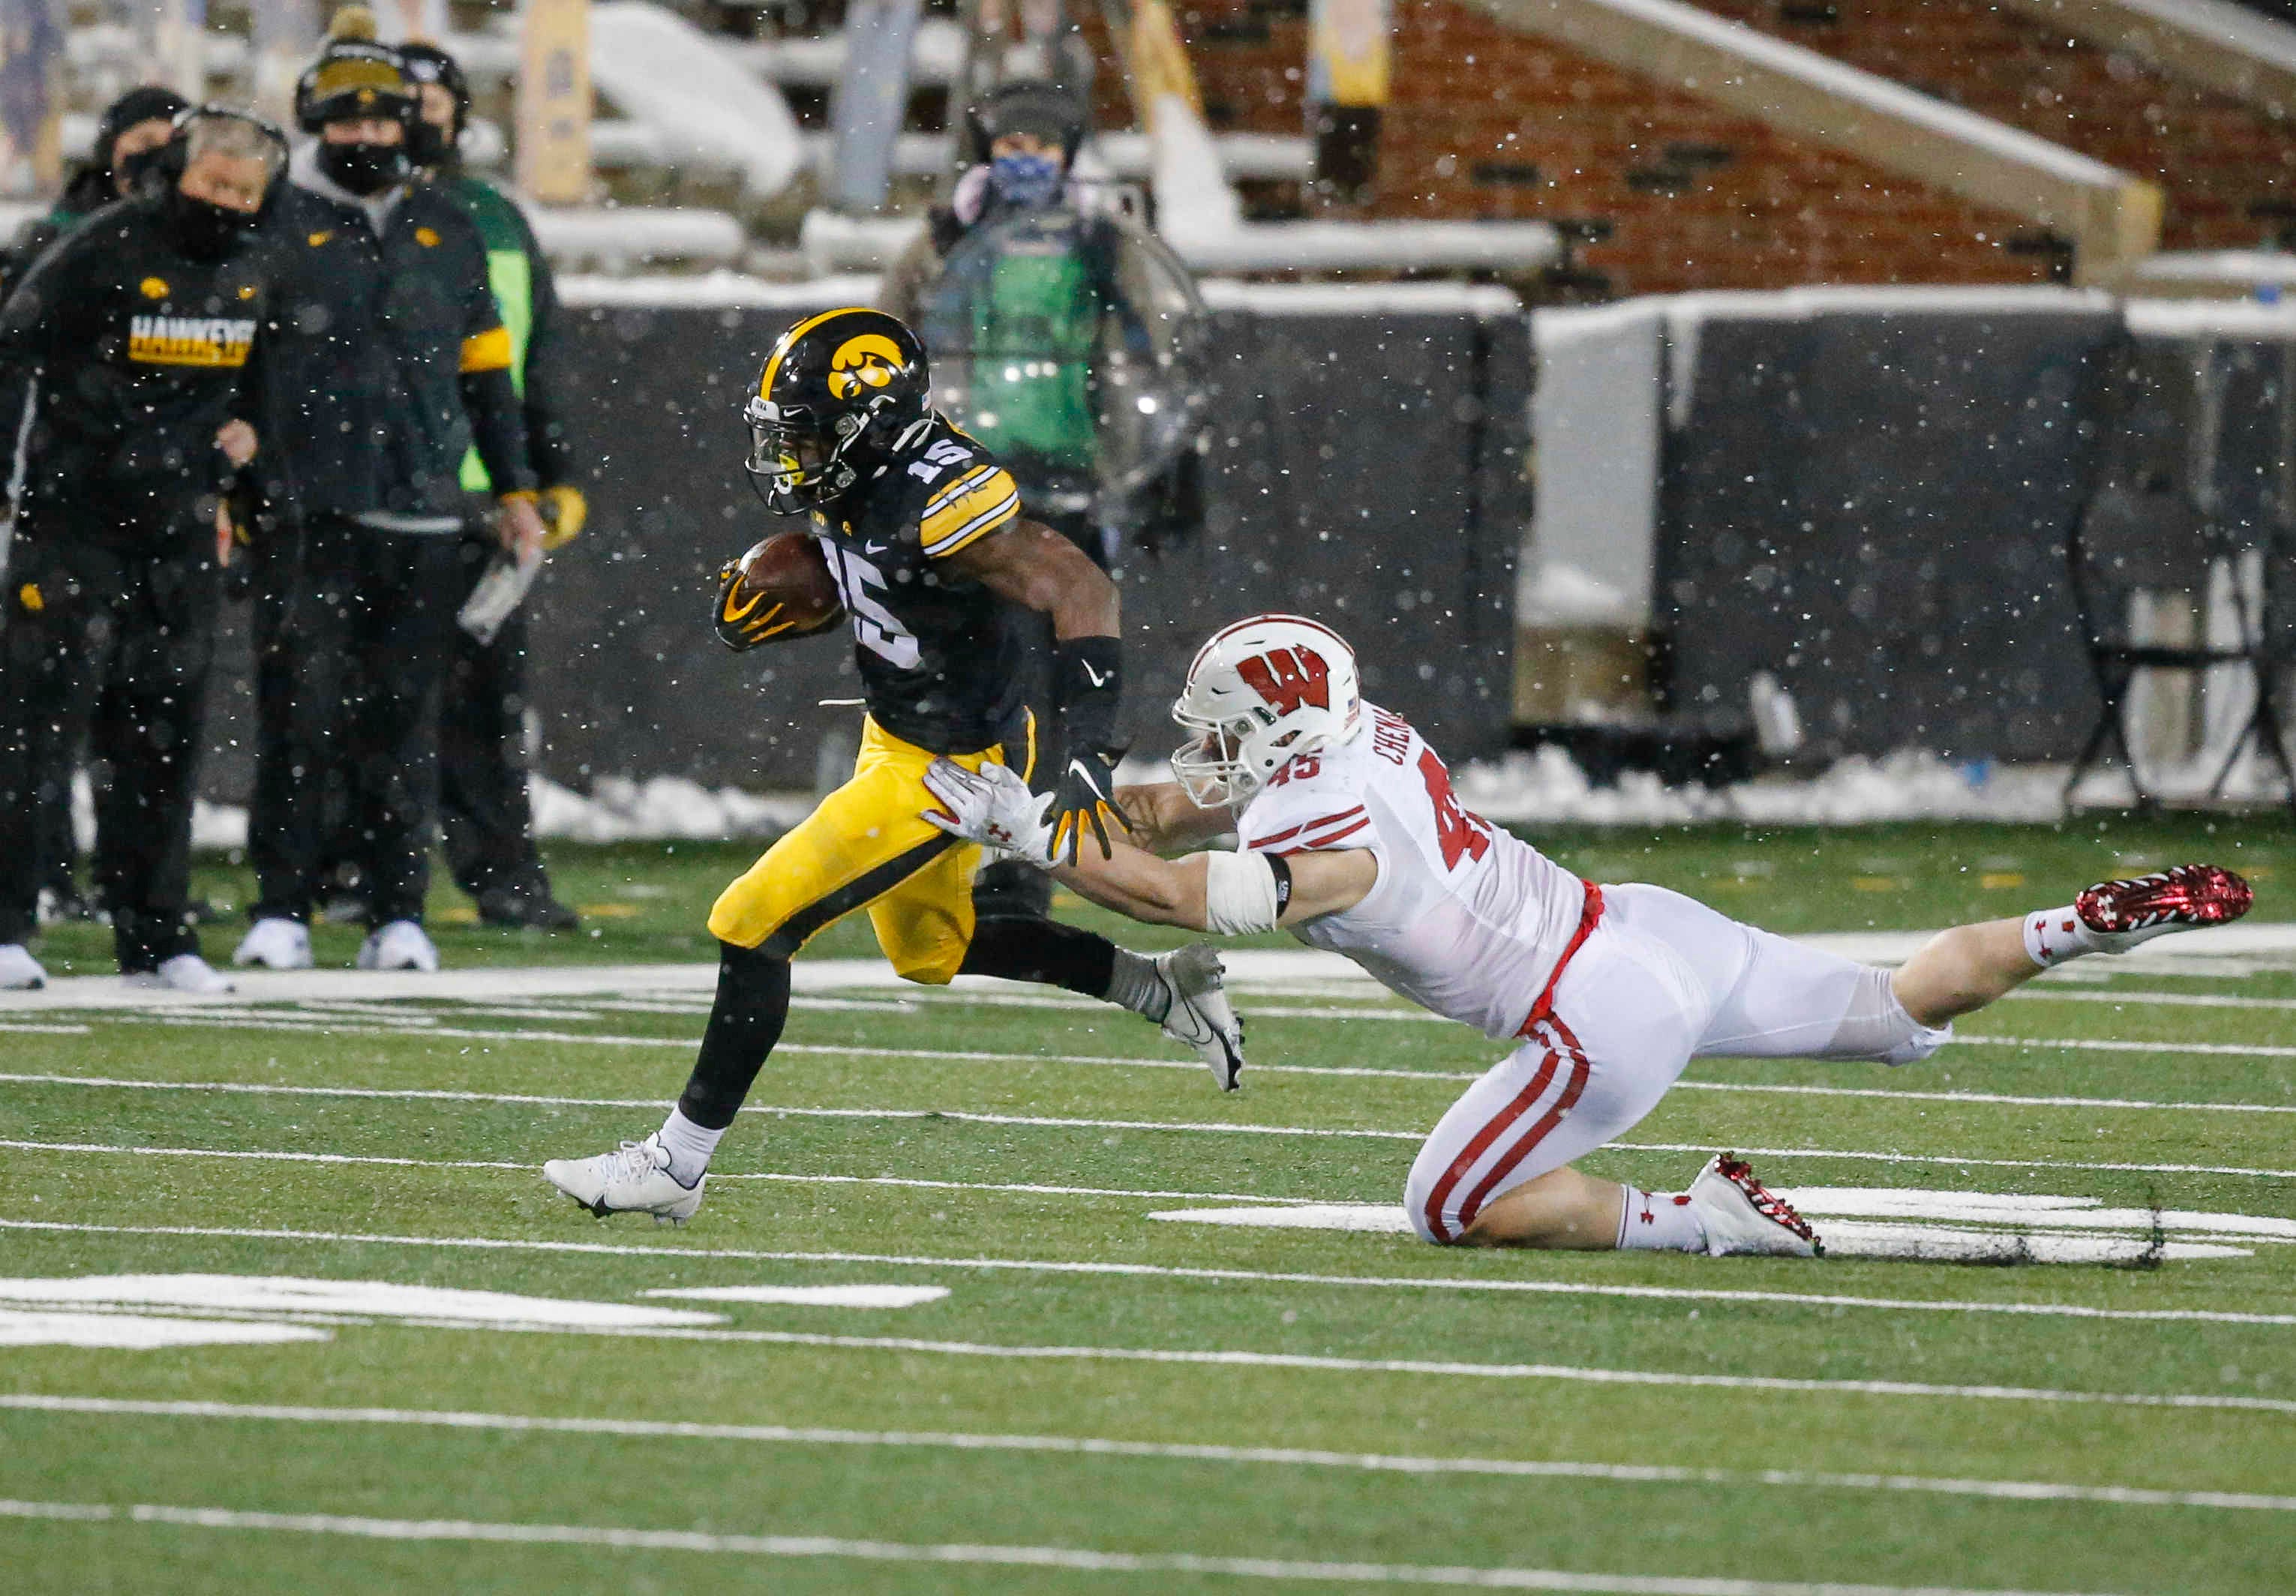 Iowa sophomore running back Tyler Goodson slips out of a Wisconsin tackle for a first down in the third quarter on Saturday, Dec. 12, 2020, at Kinnick Stadium in Iowa City, Iowa.